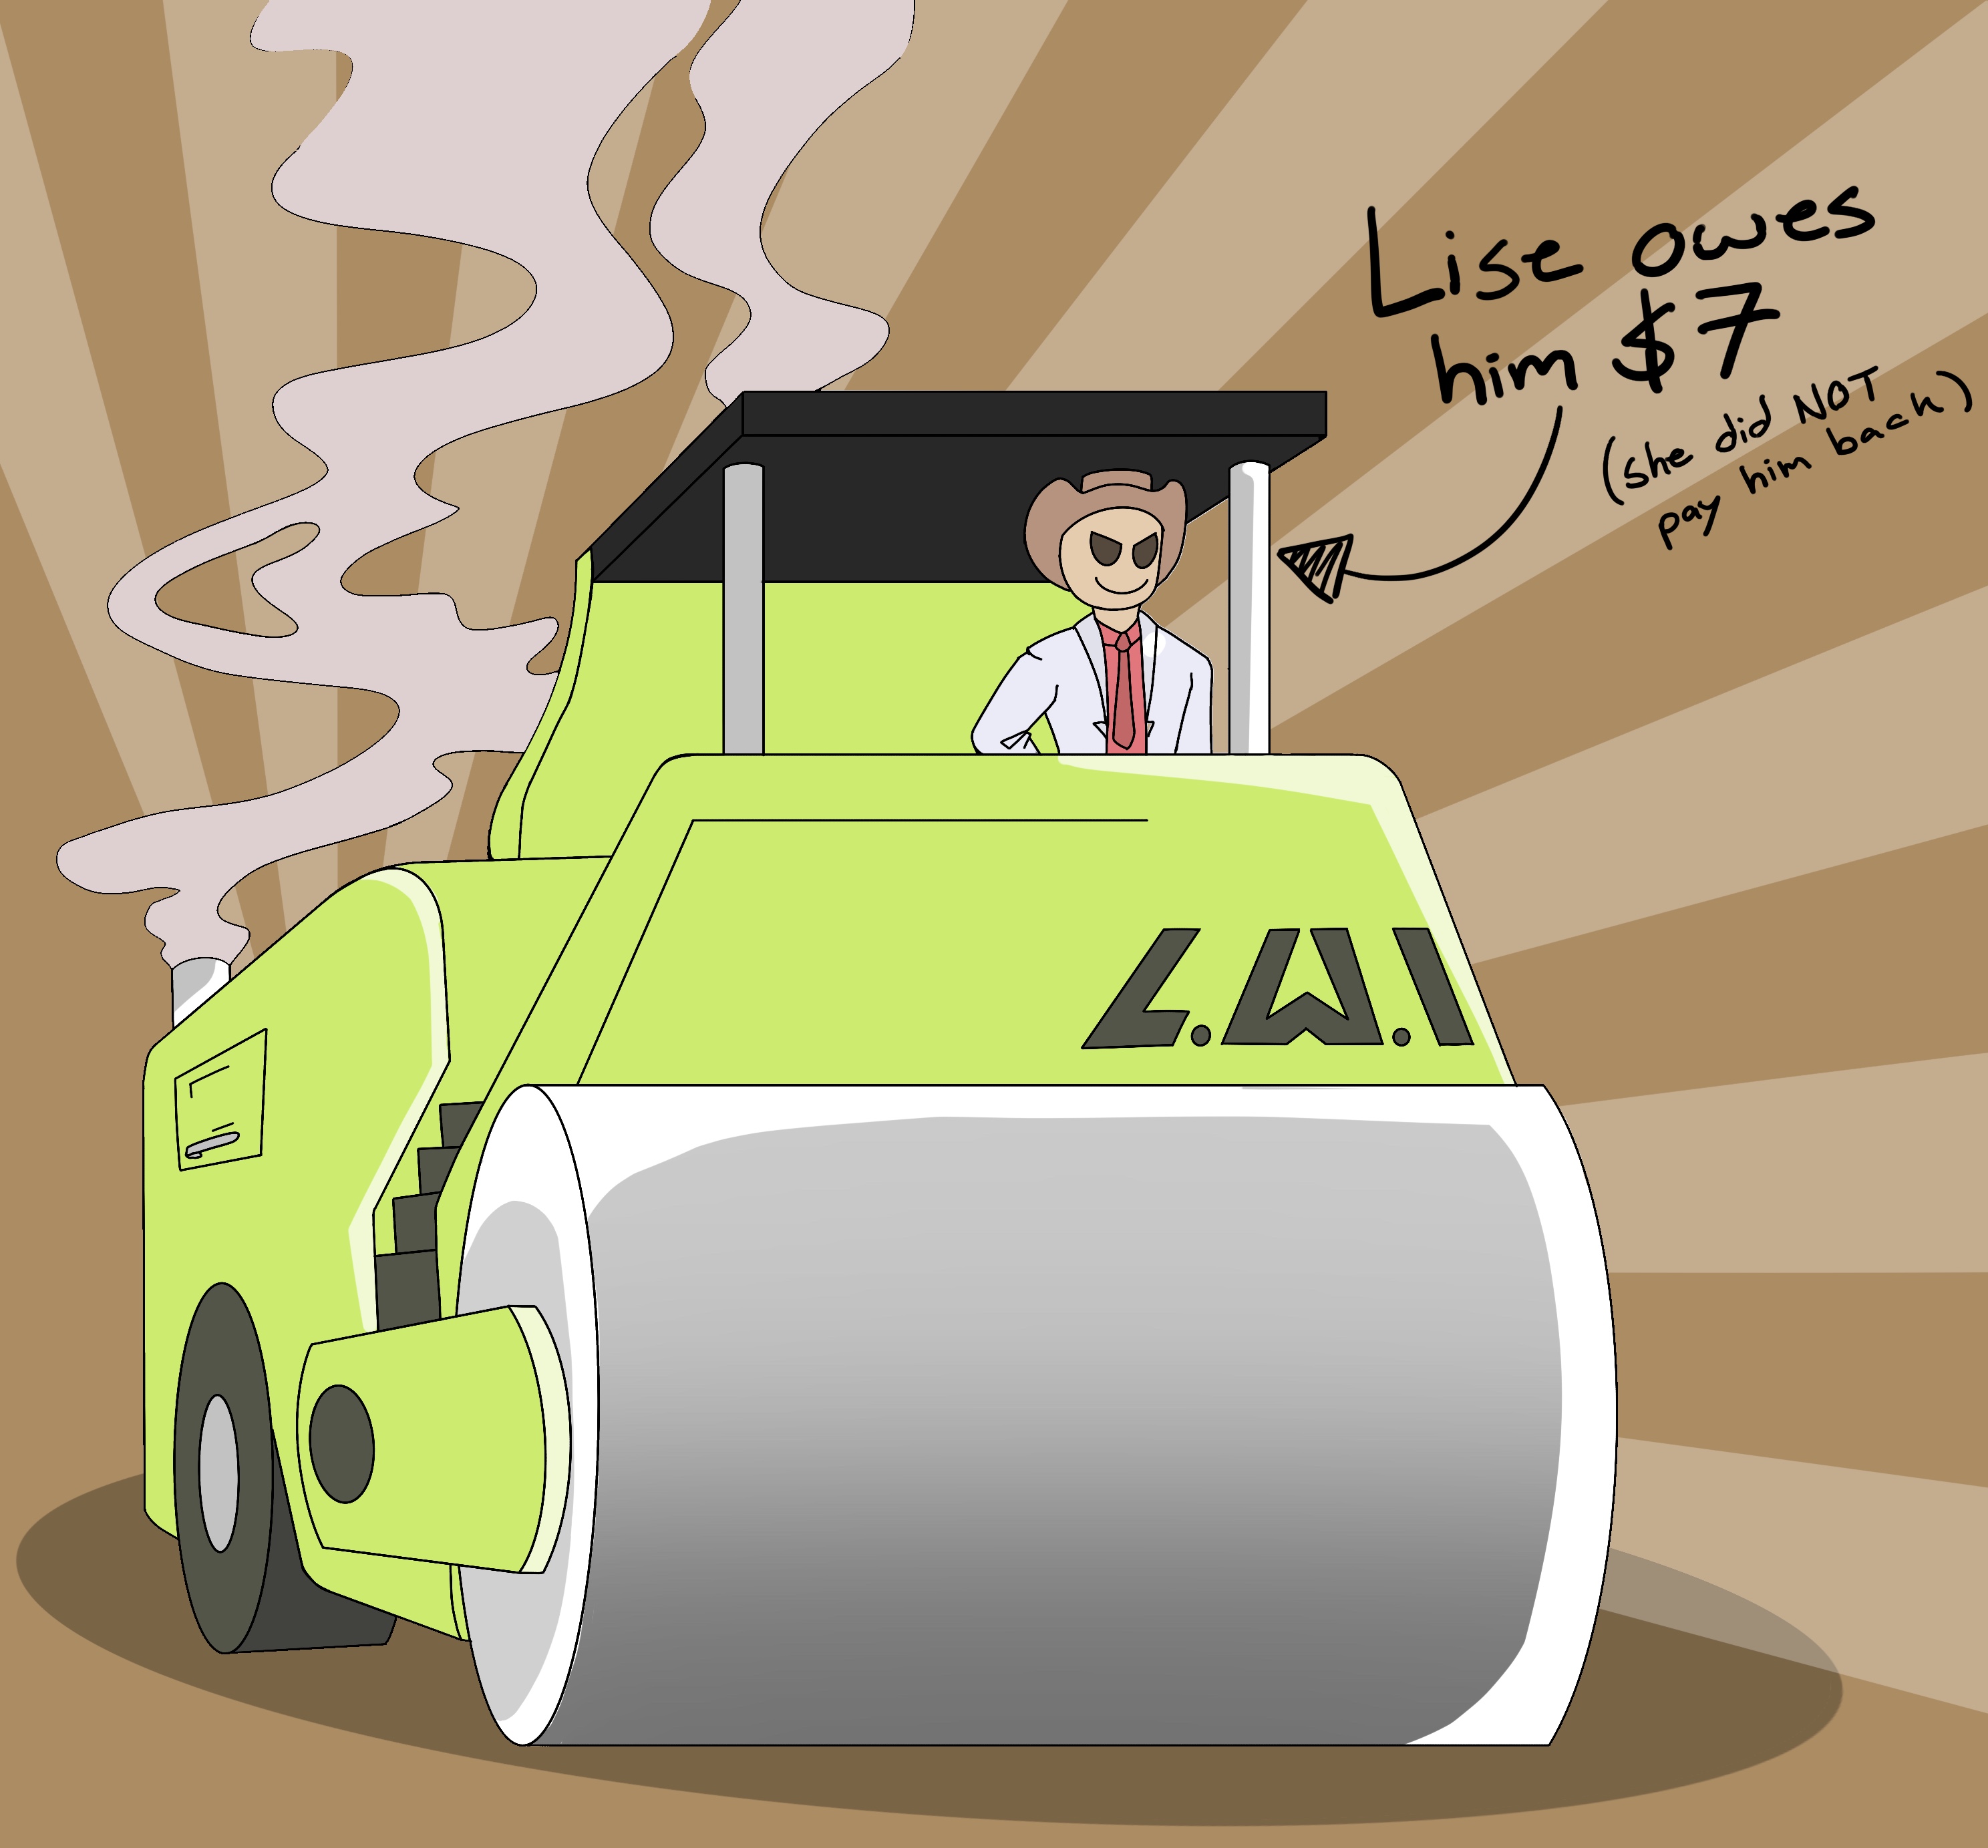 A large yellow steam roller, piloted by a Mii in a white suit with red tie, and a cowboy hat. text on screen says 'Lise owes him $7 (she did NOT pay him back)'. there is an arrow pointing from the text to the driver